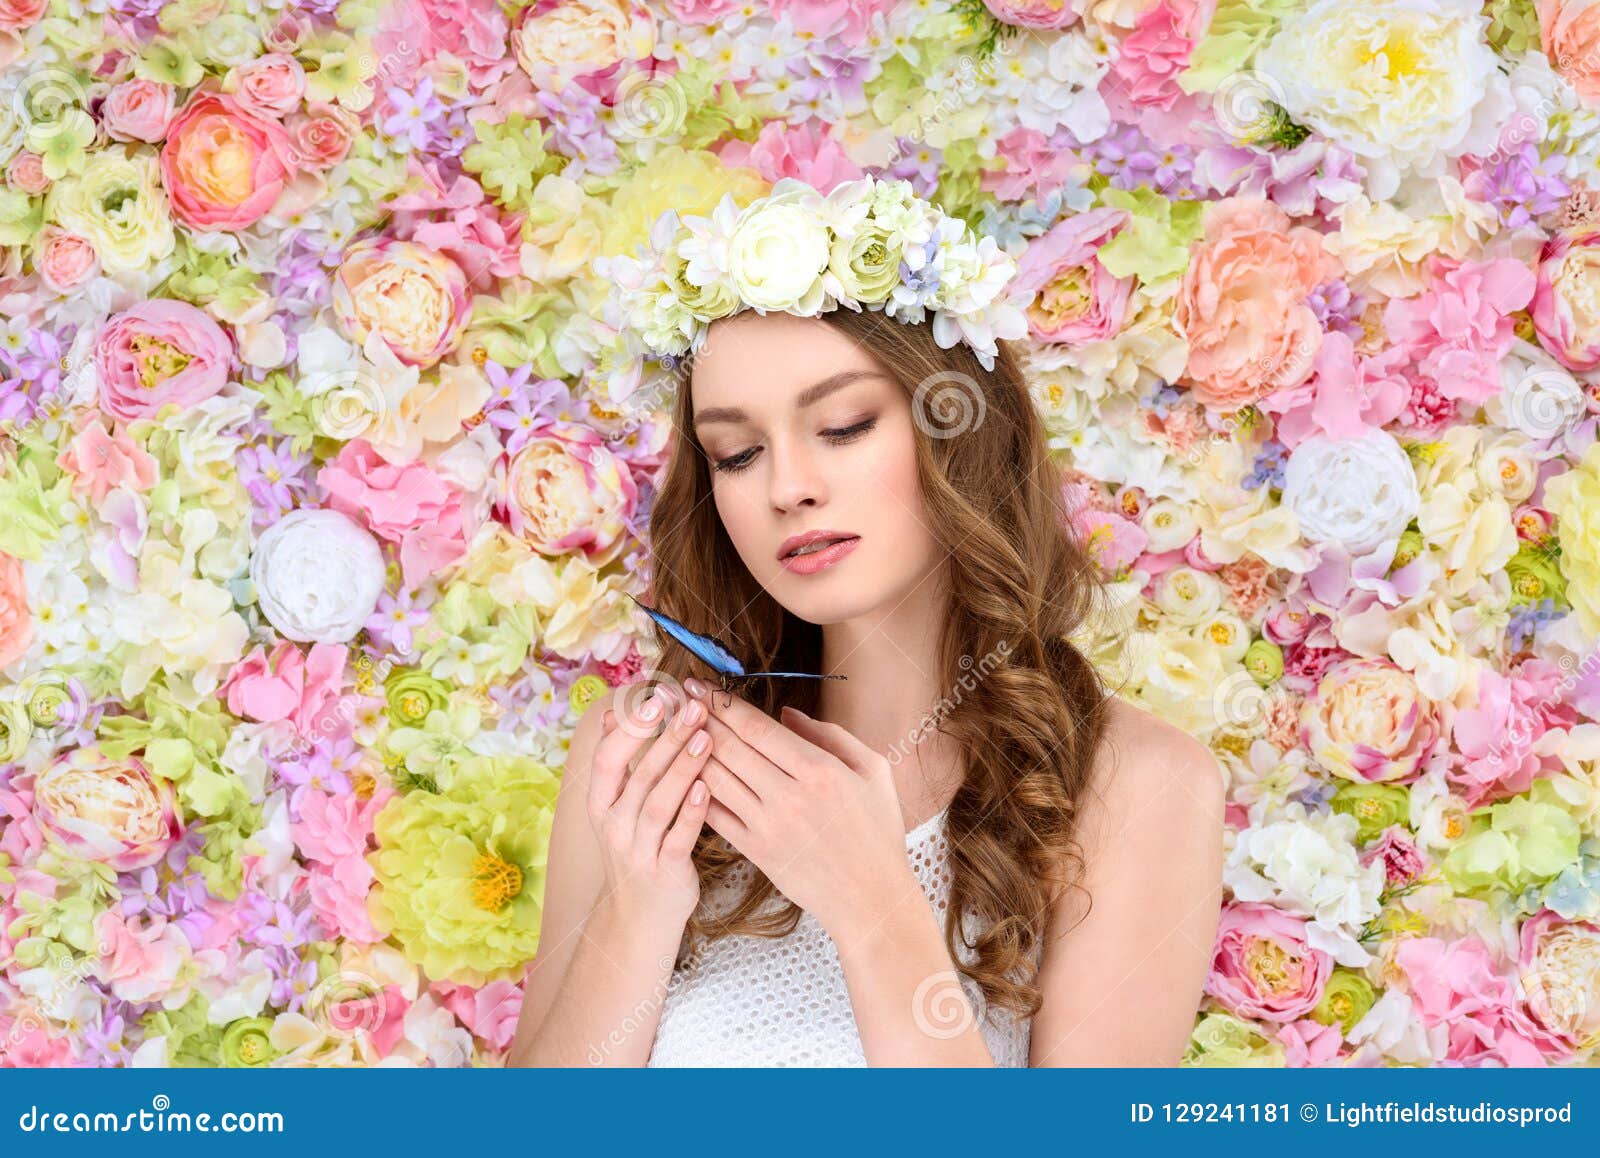 young woman with curly hair in floral wreath with butterfly